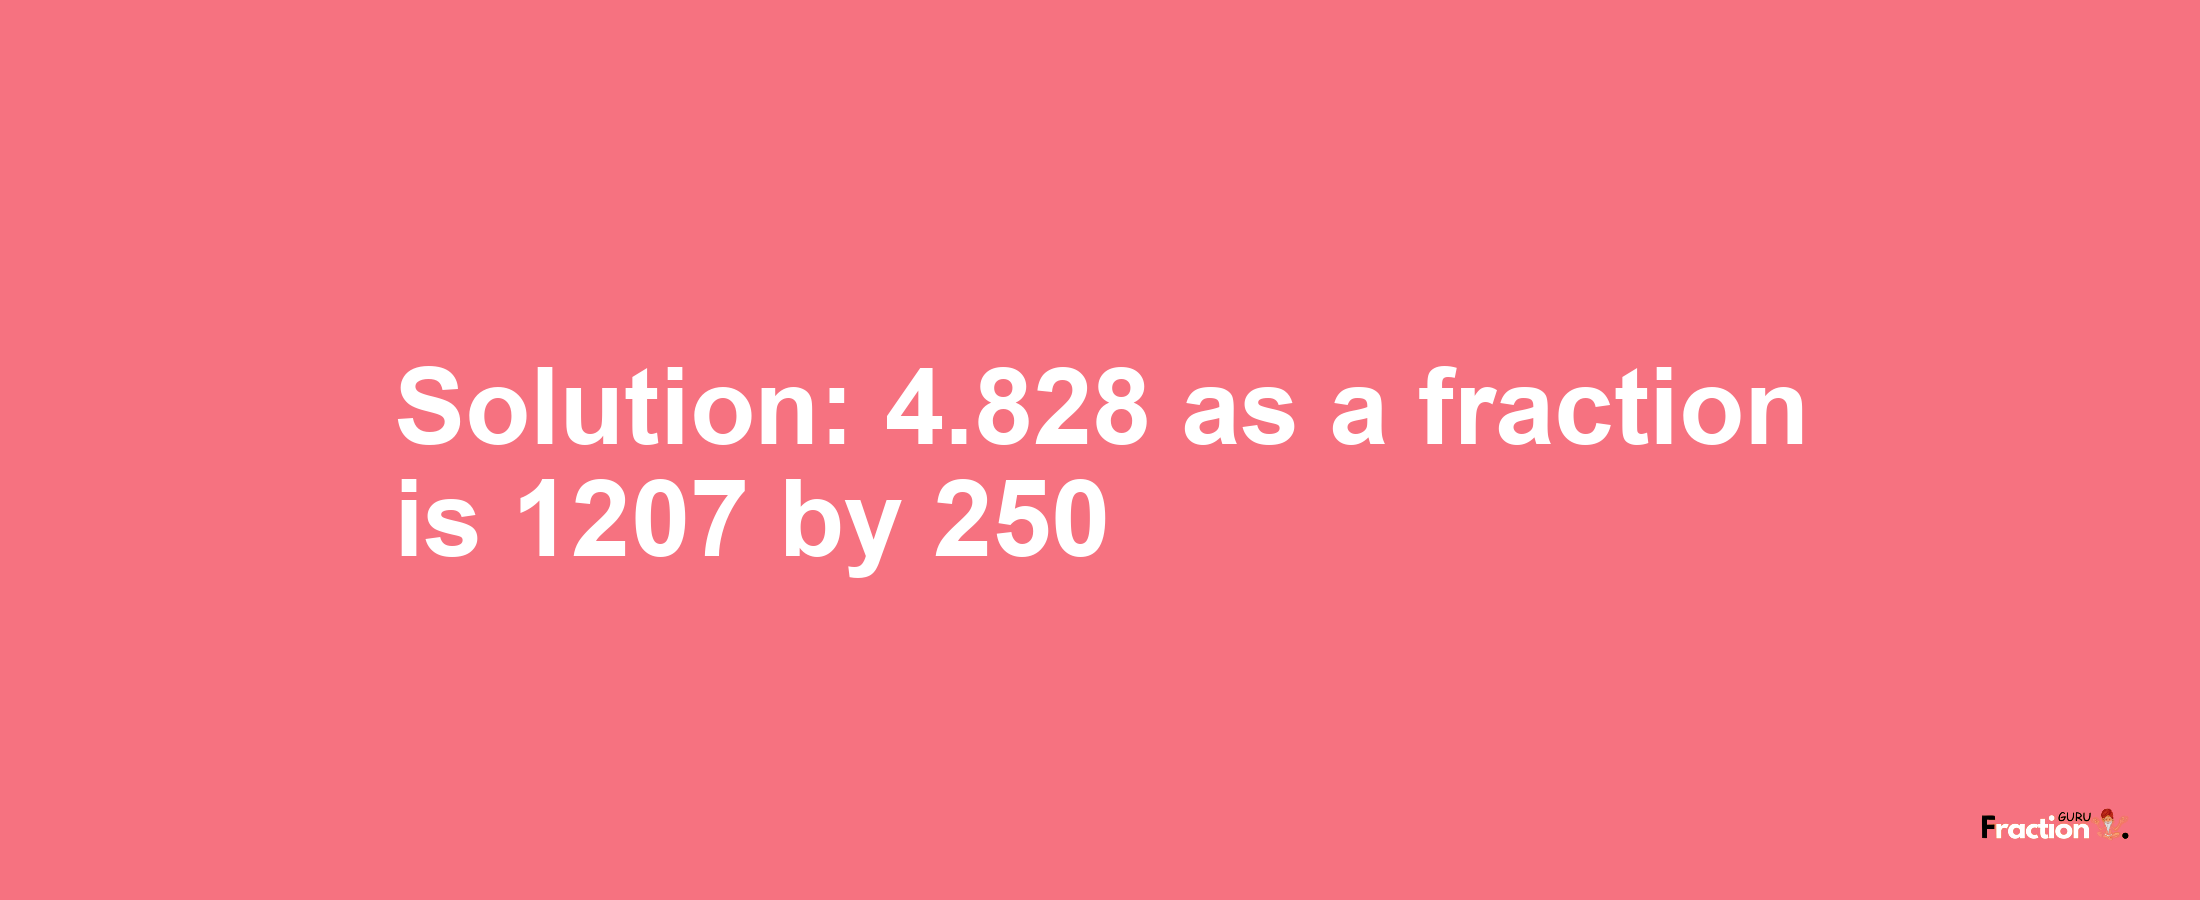 Solution:4.828 as a fraction is 1207/250